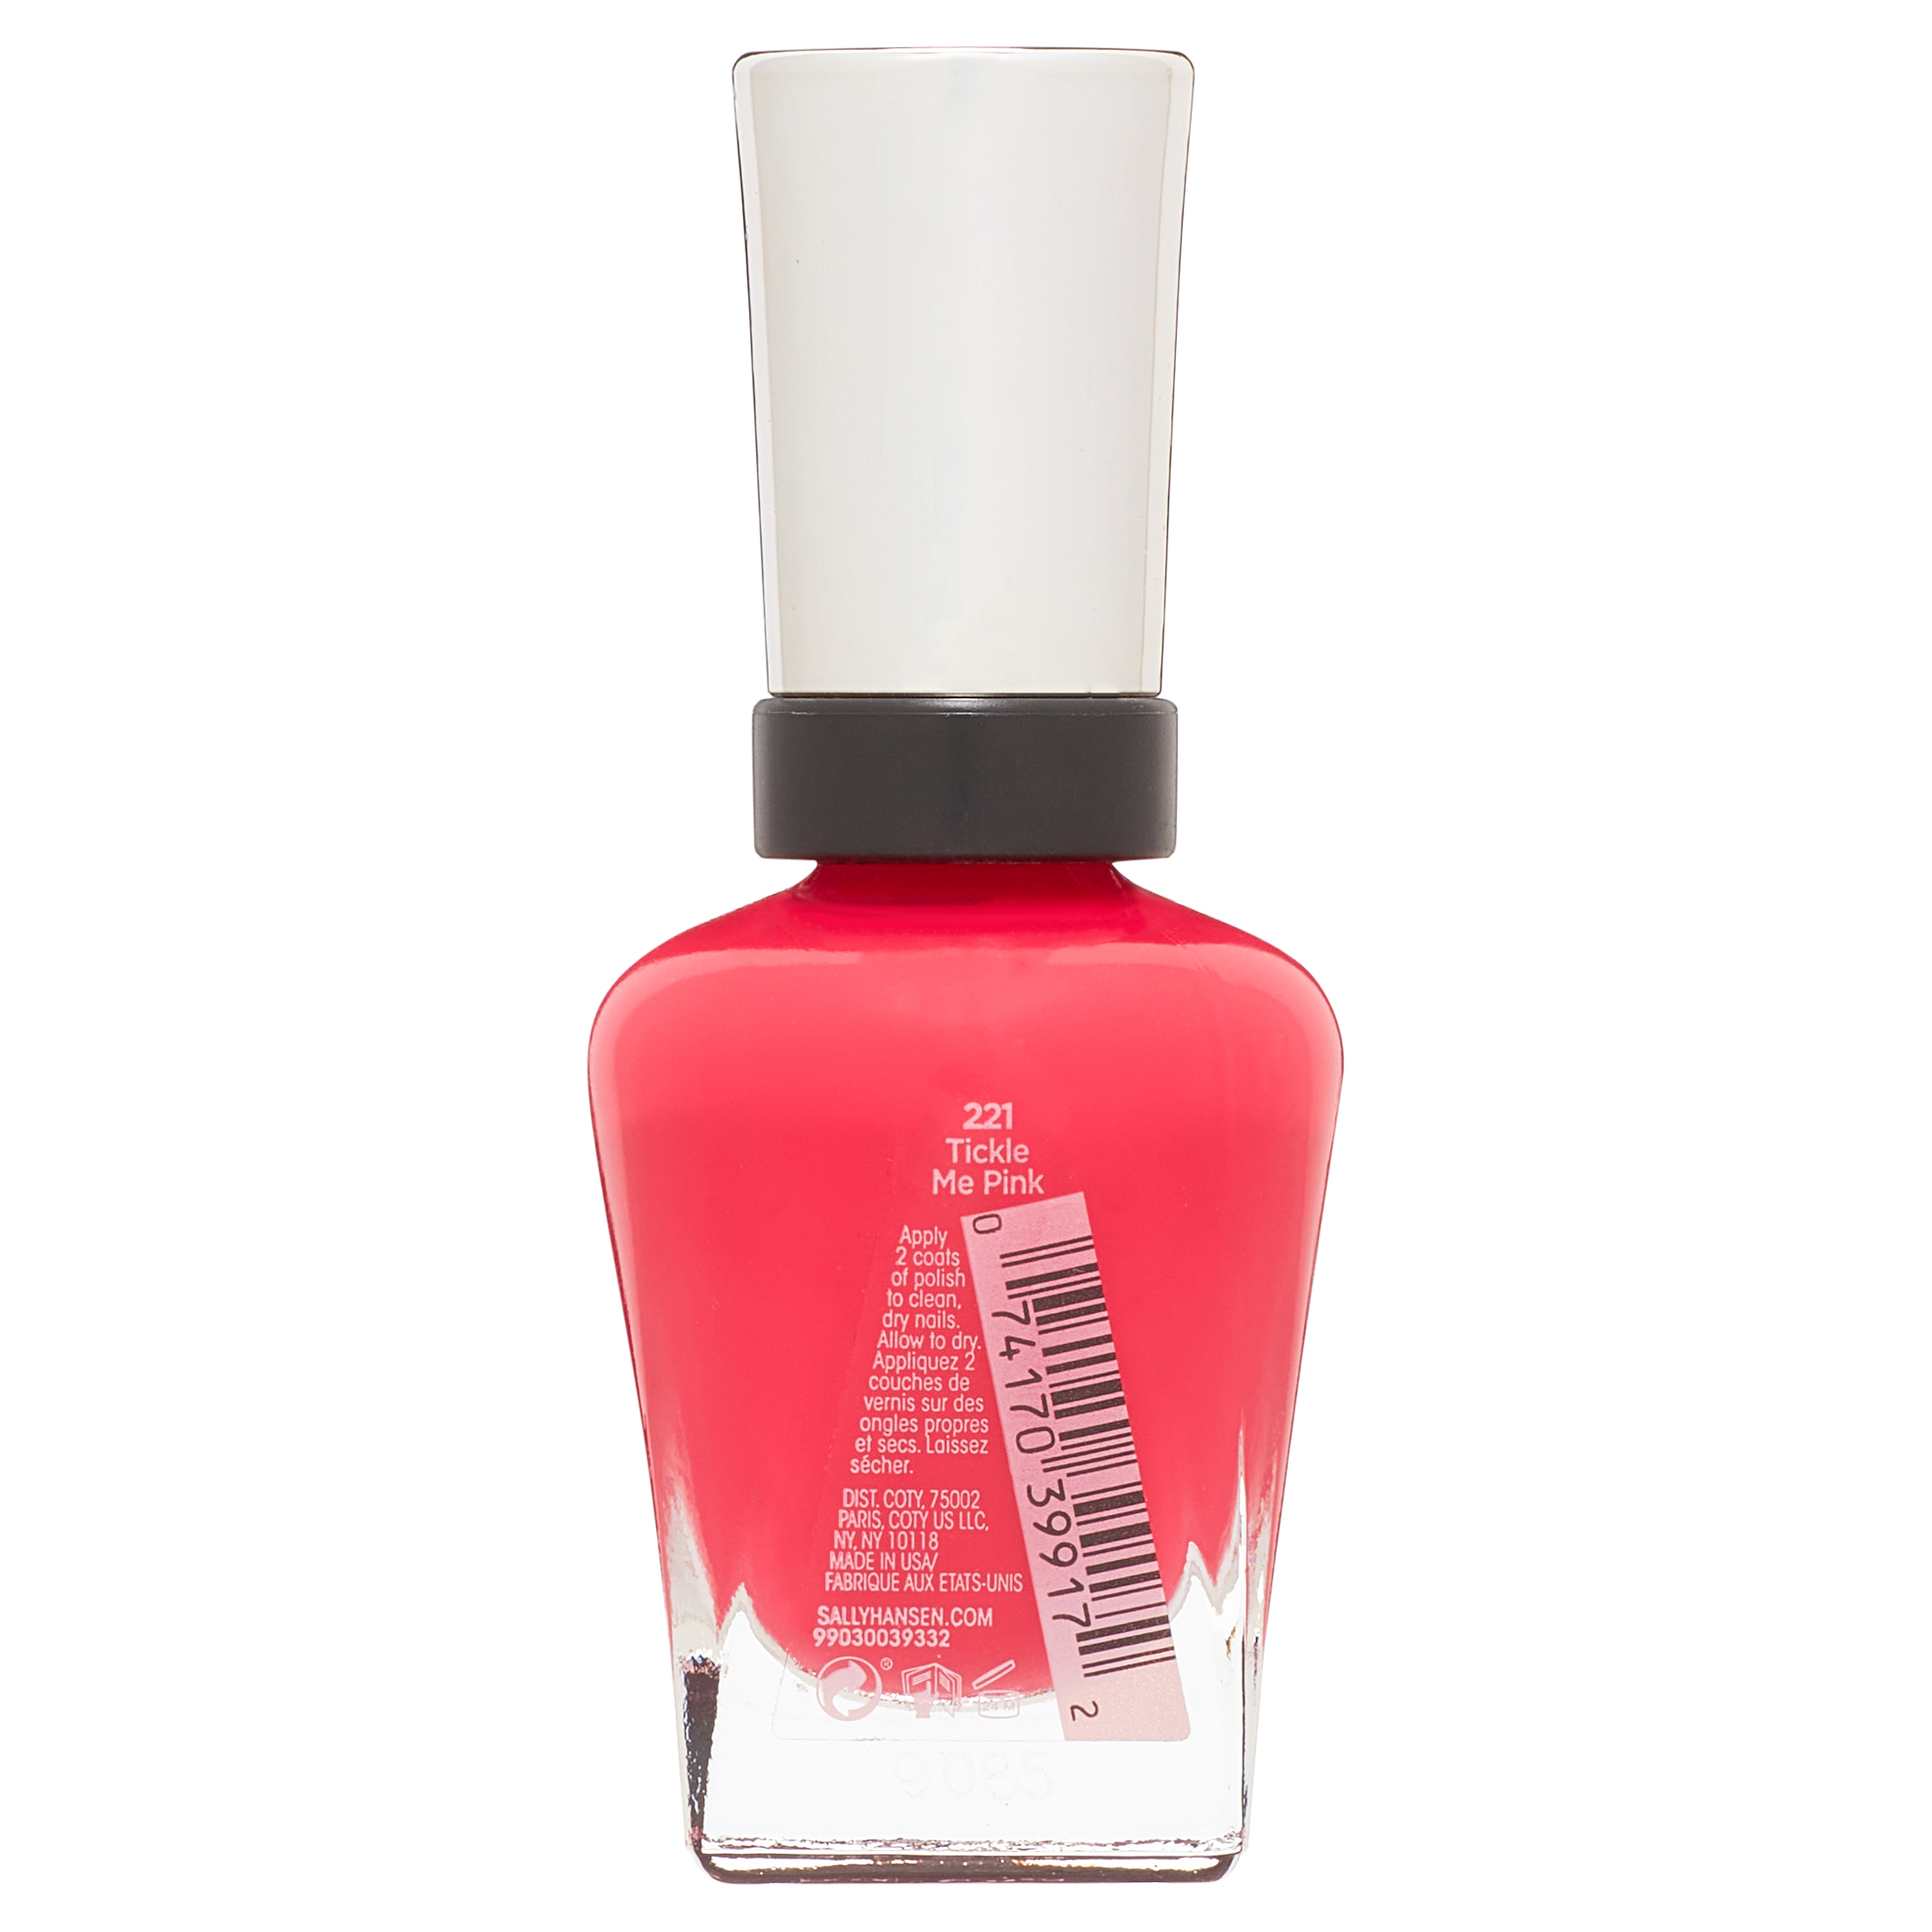 Sally Hansen Complete Salon Manicure Nail Color, Tickle Me Pink - image 7 of 15